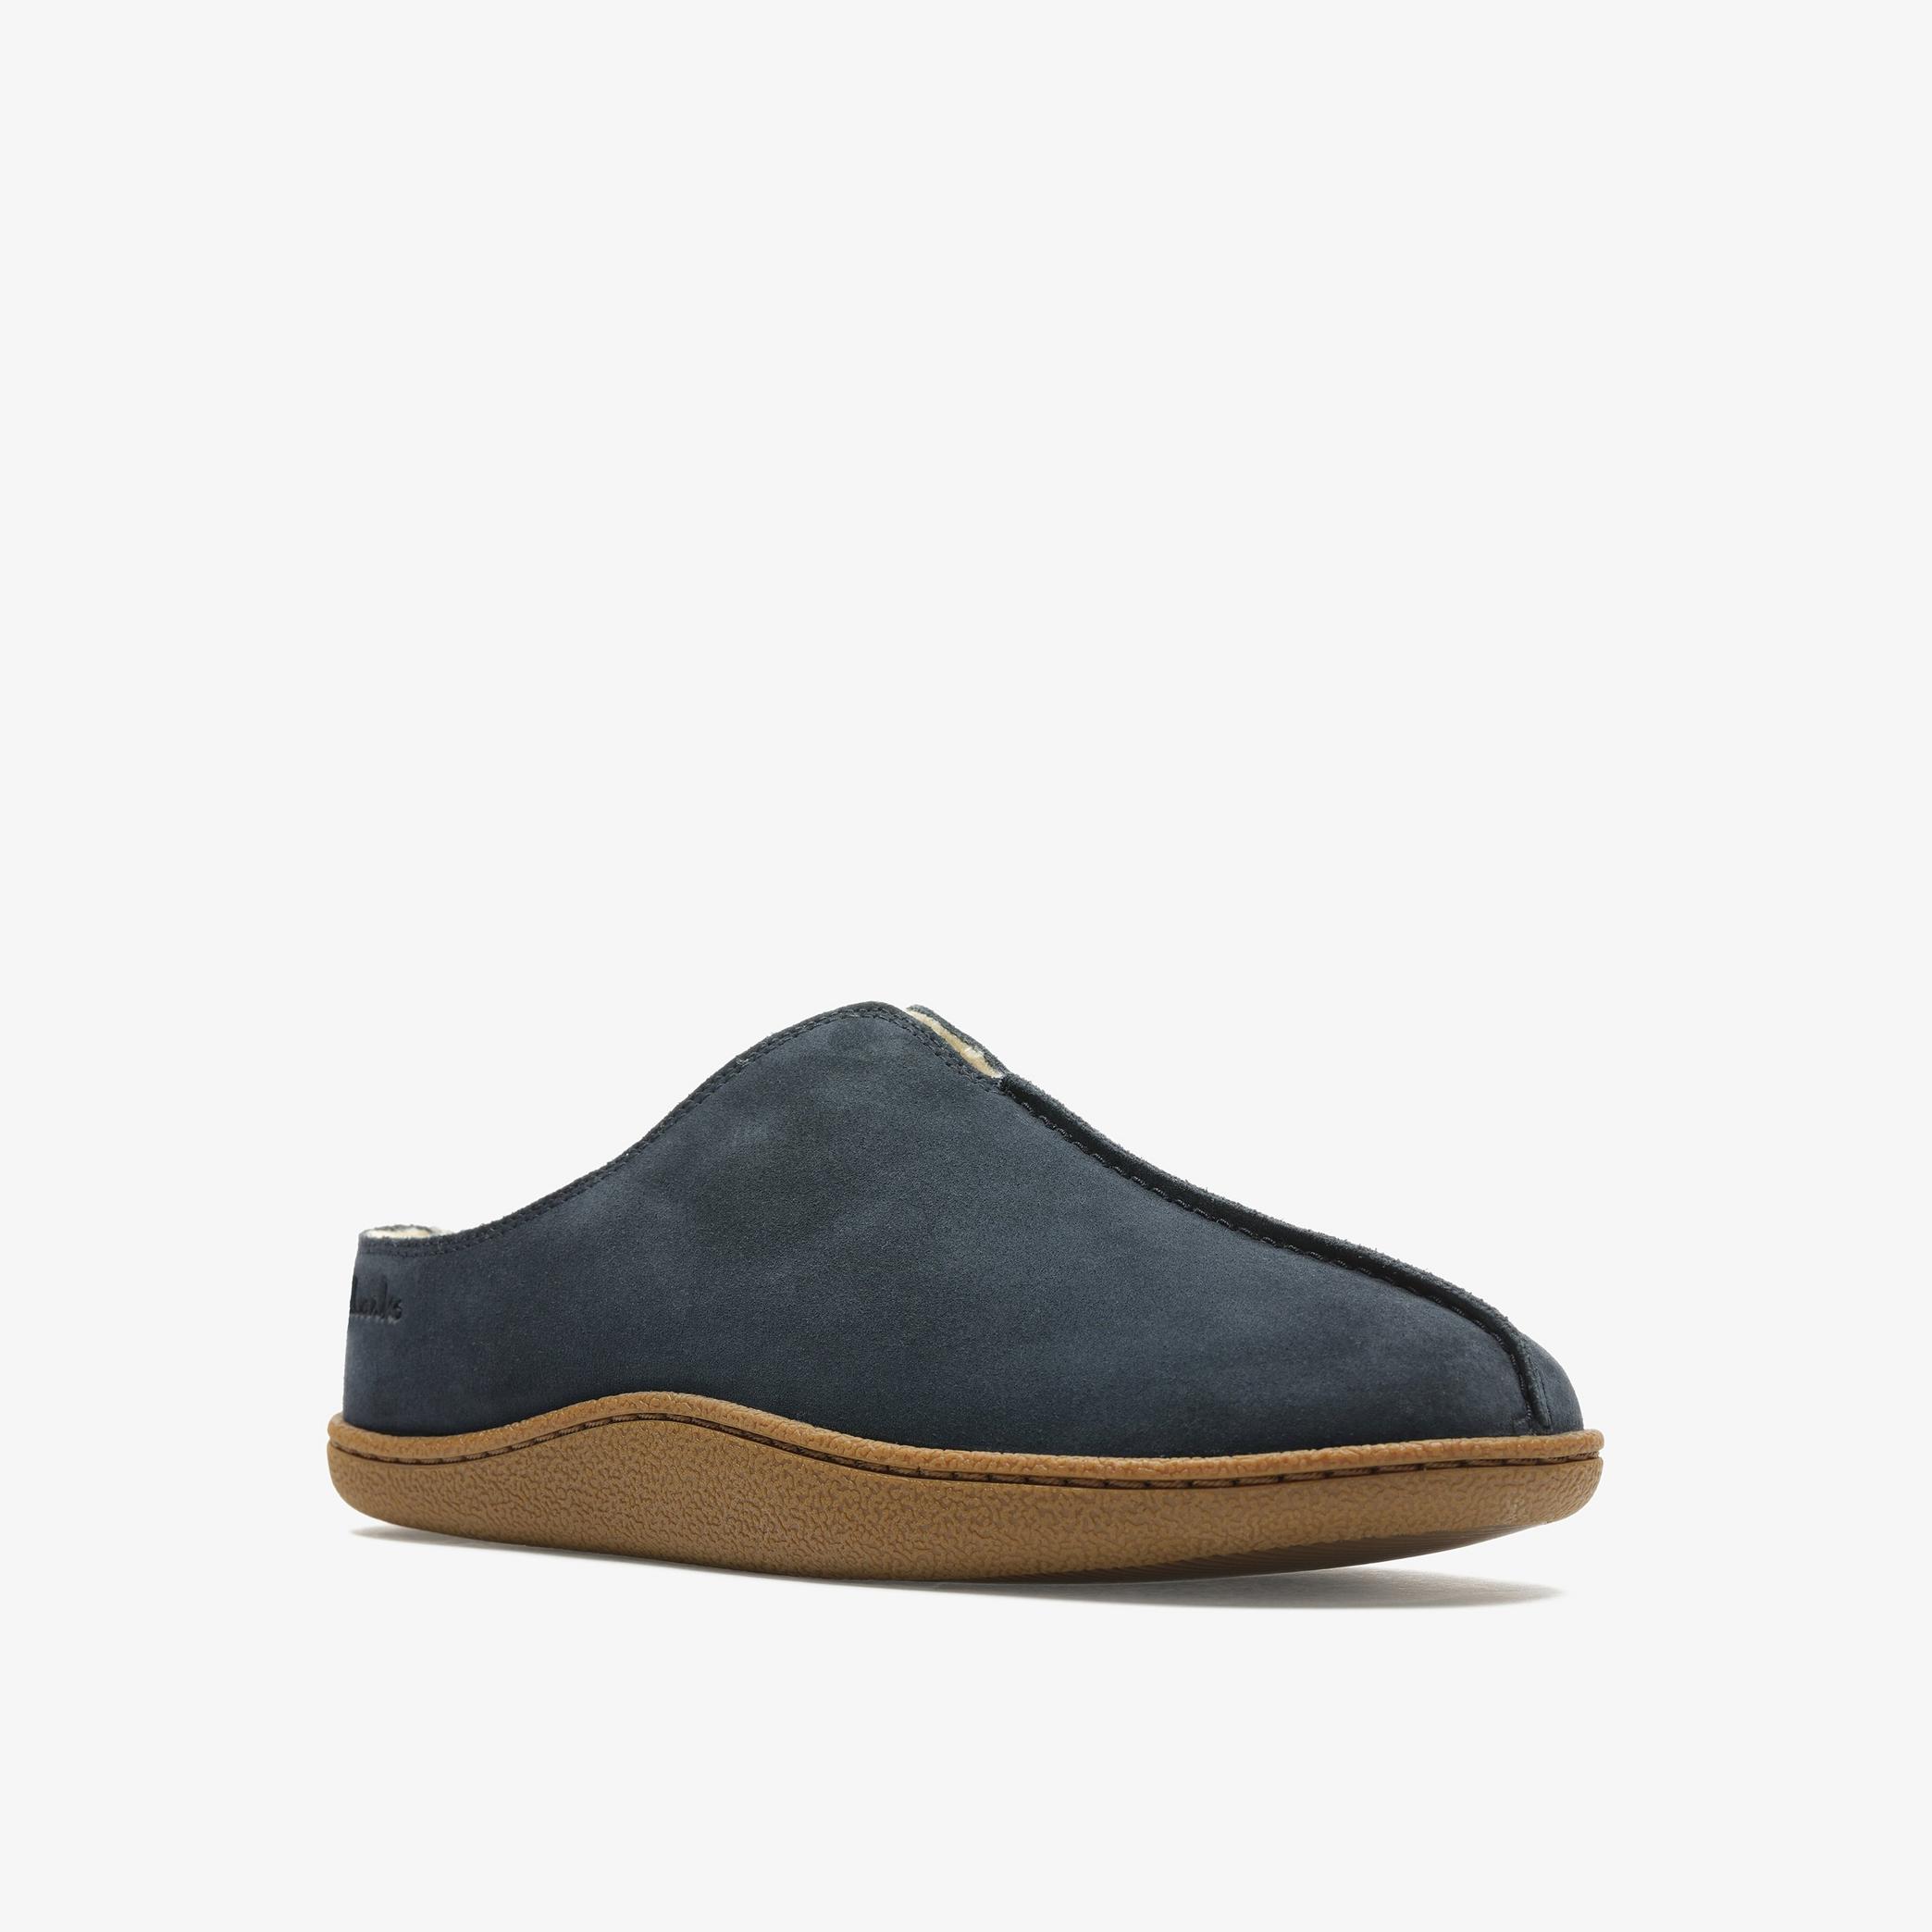 Home Mule Navy Suede Slippers, view 3 of 6